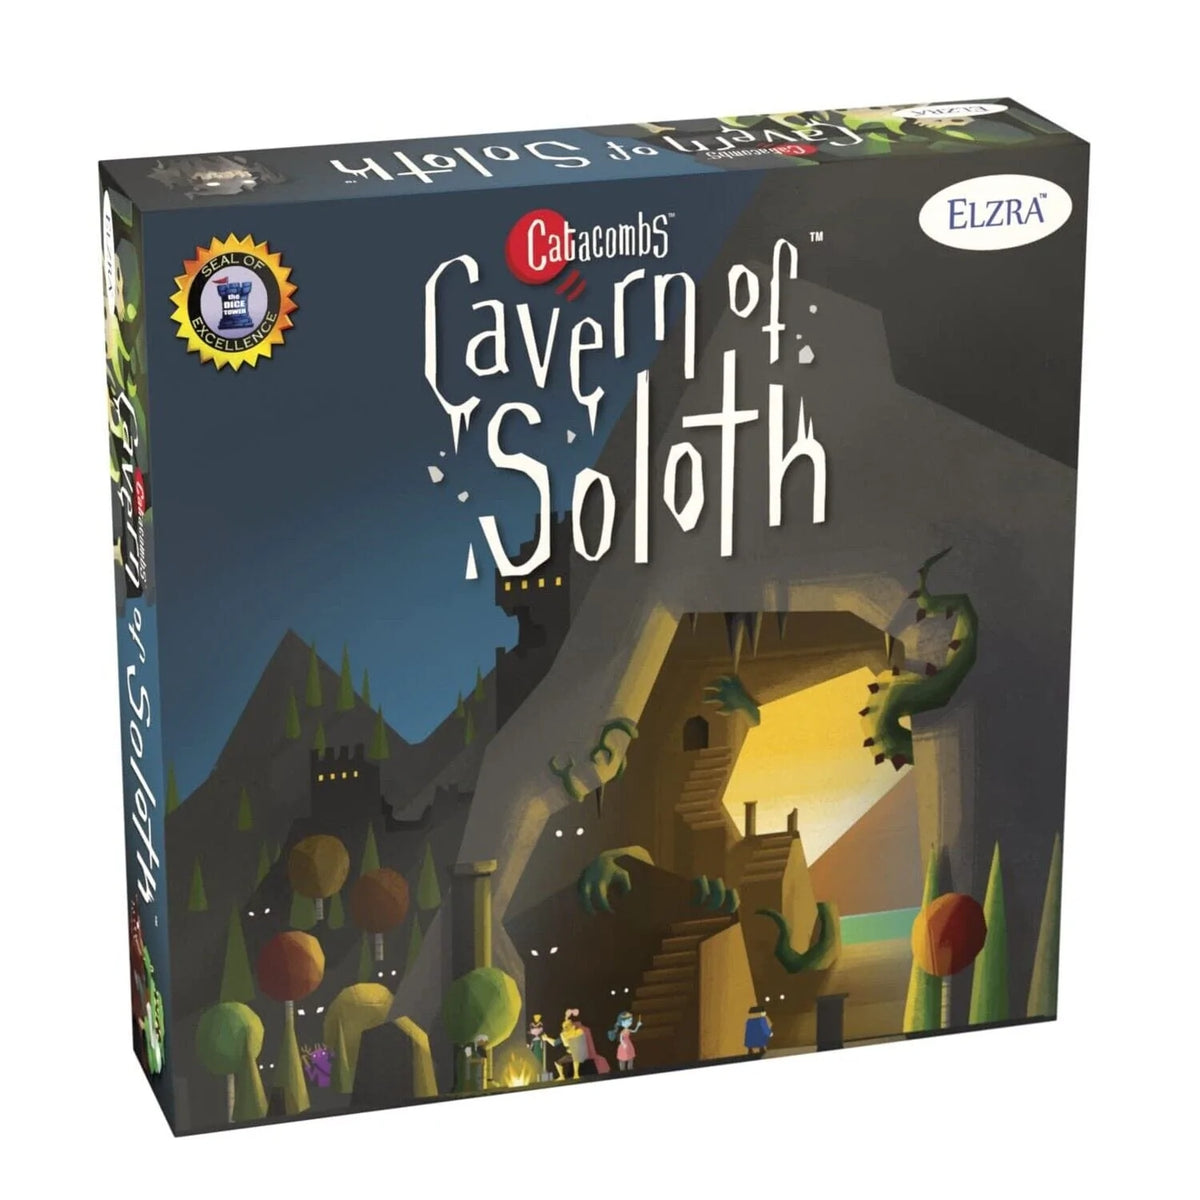 Catacombs: Cavern of Soloth Expansion - Third Eye